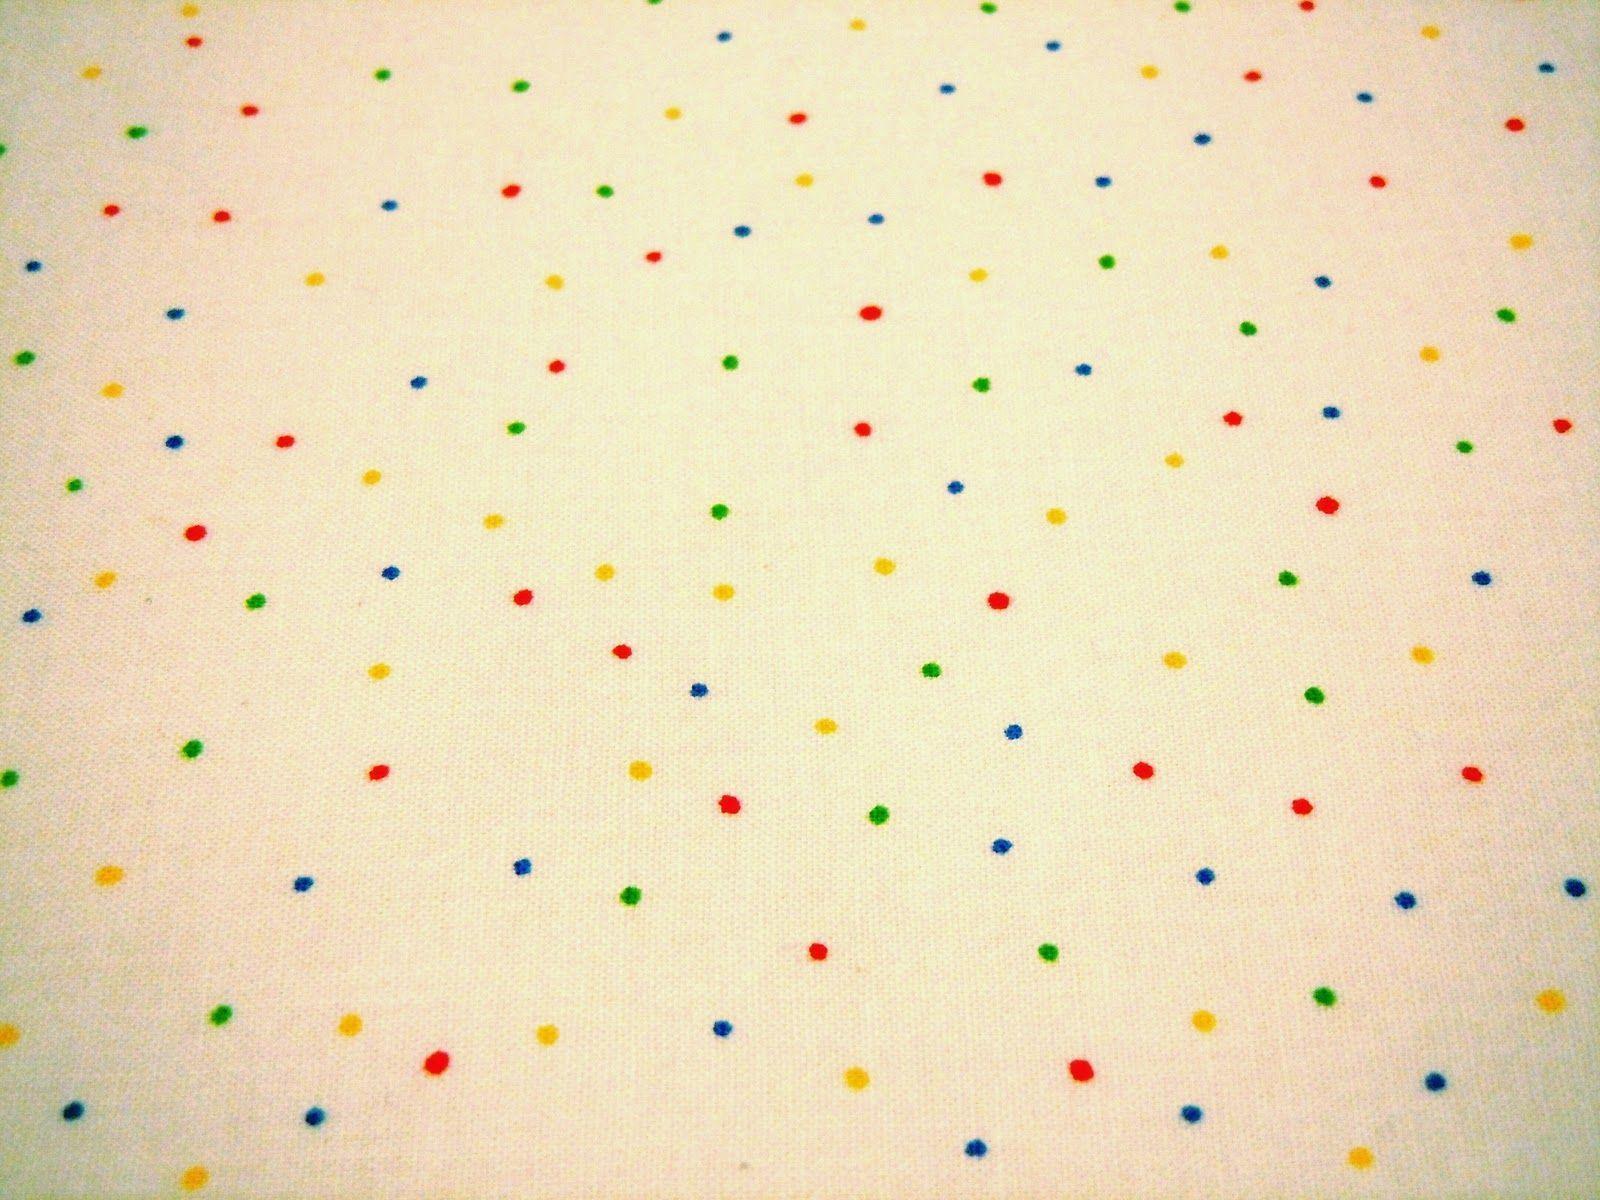 tumblr backgrounds dolliecrave Plain Pictures > Gallery Tumblr For